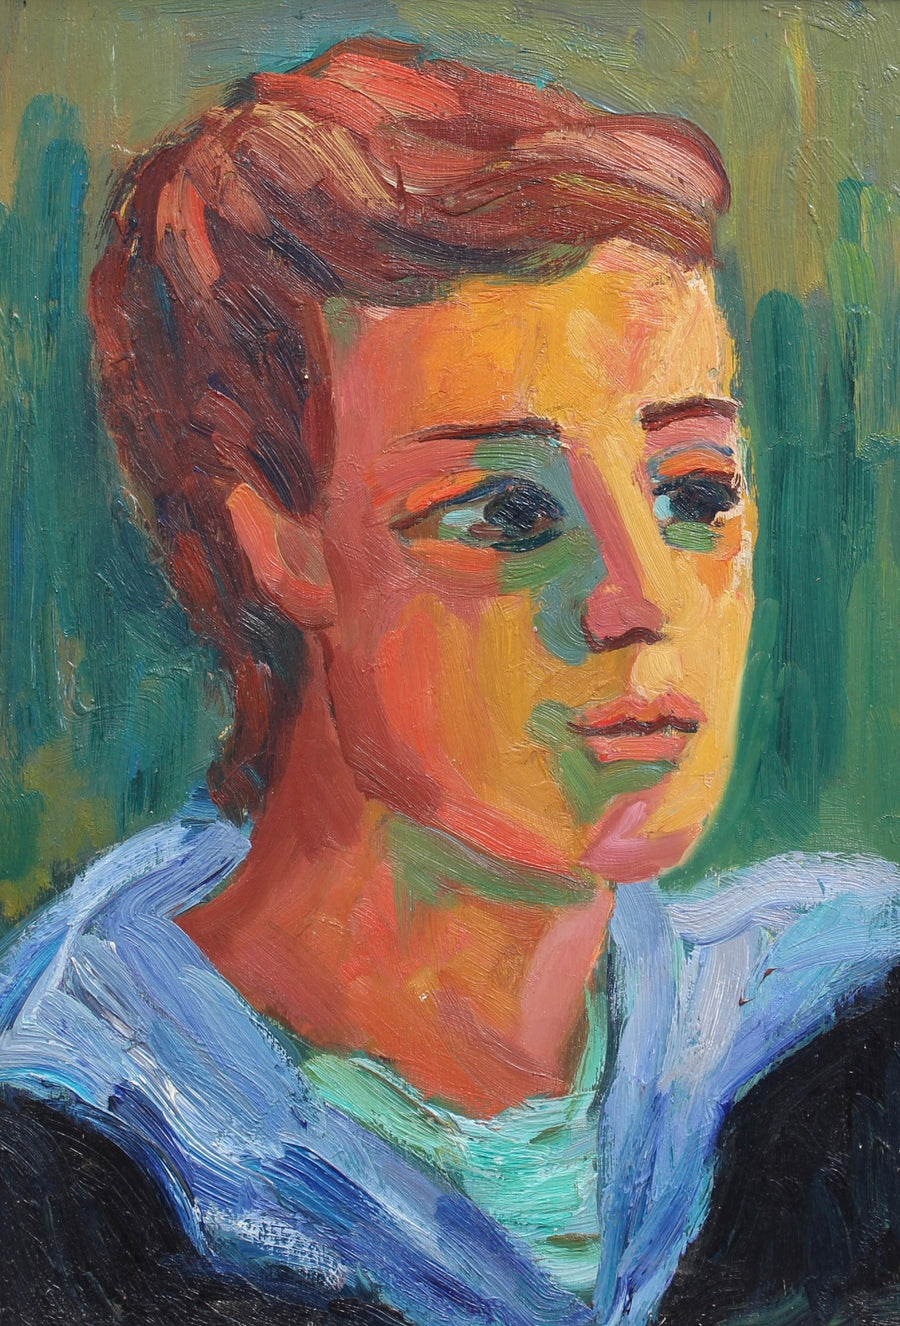 'Portrait of a Young Woman' by Anna Costa (circa 1960s)